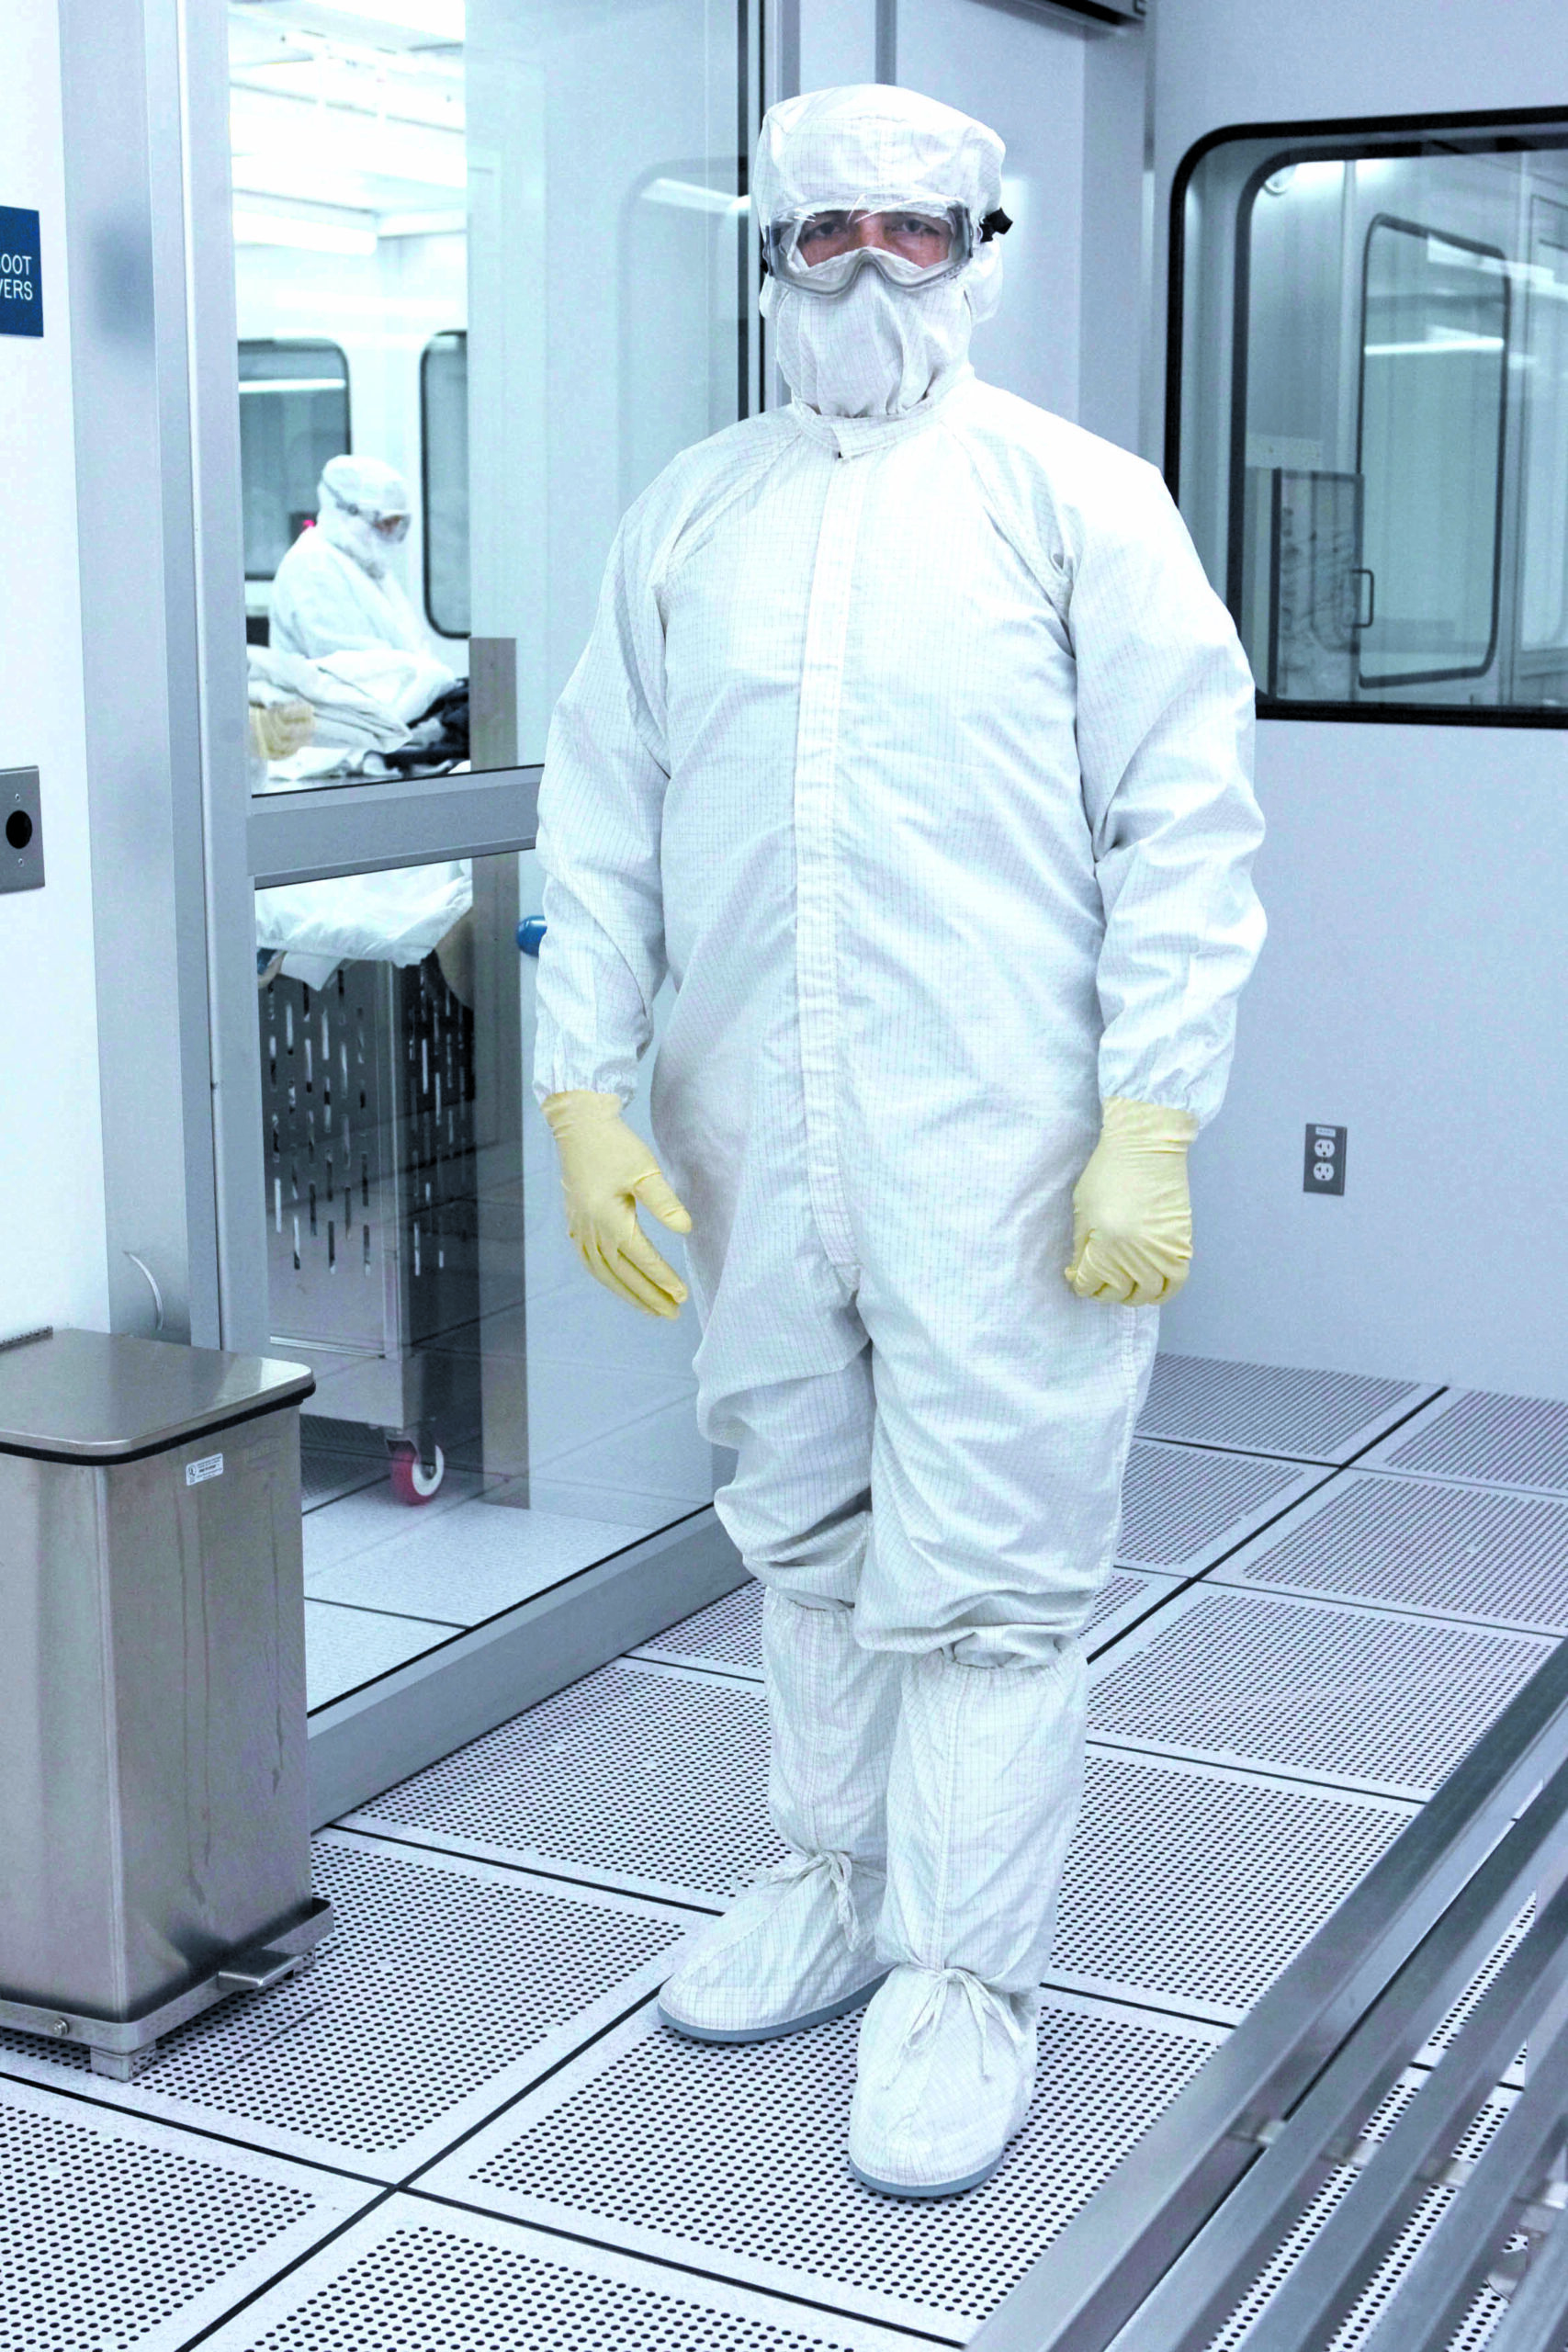 Cleanroom Gowning Procedures 101: A Guide - Vivid Air South Africa